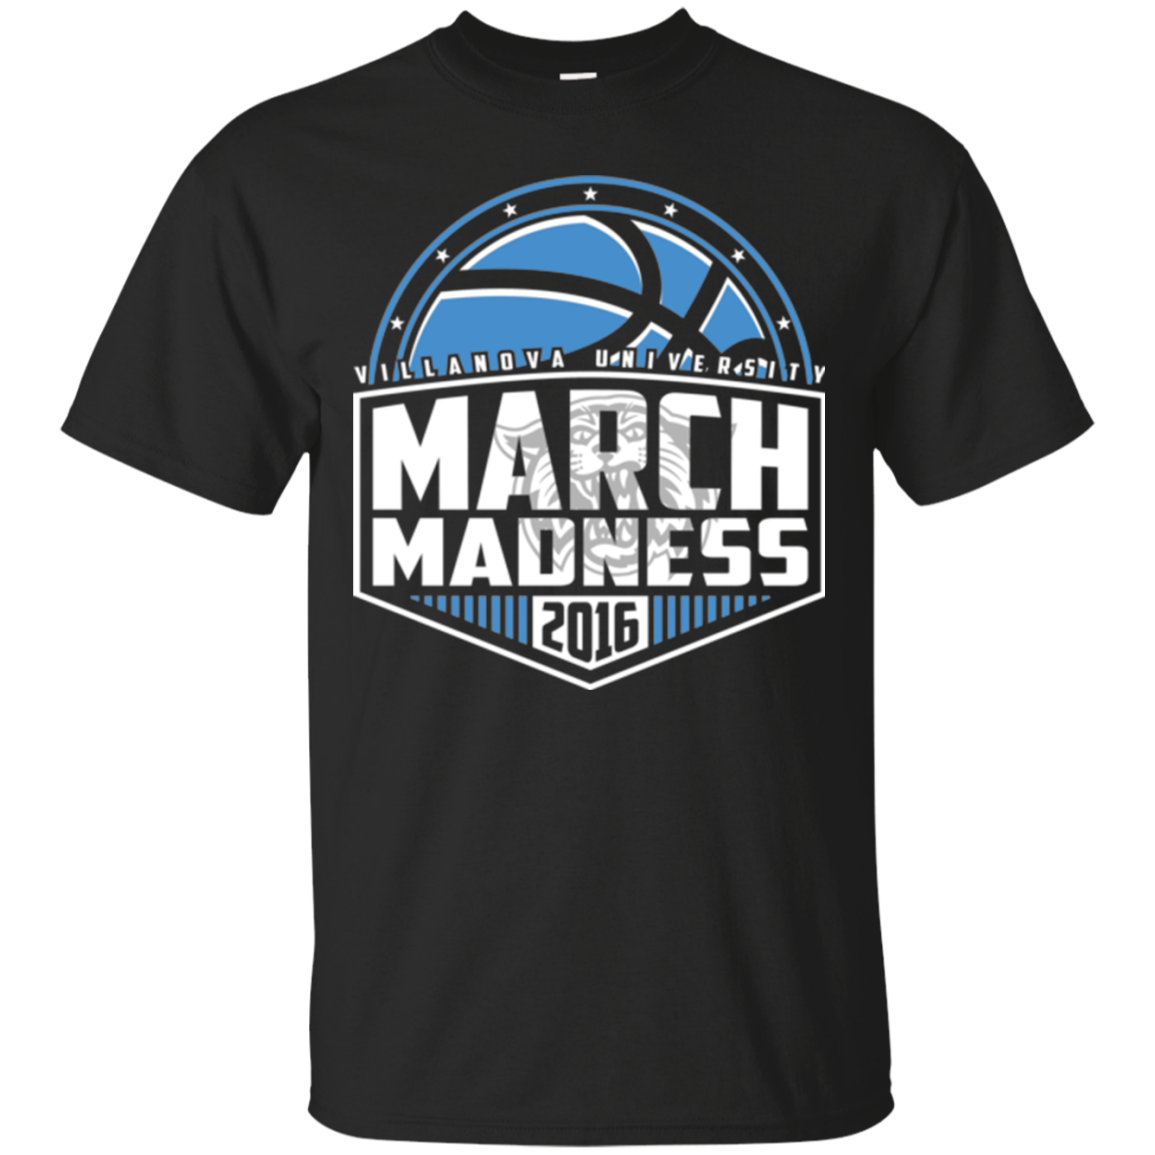 March Madness 2016 Memphis State - Teesmiley